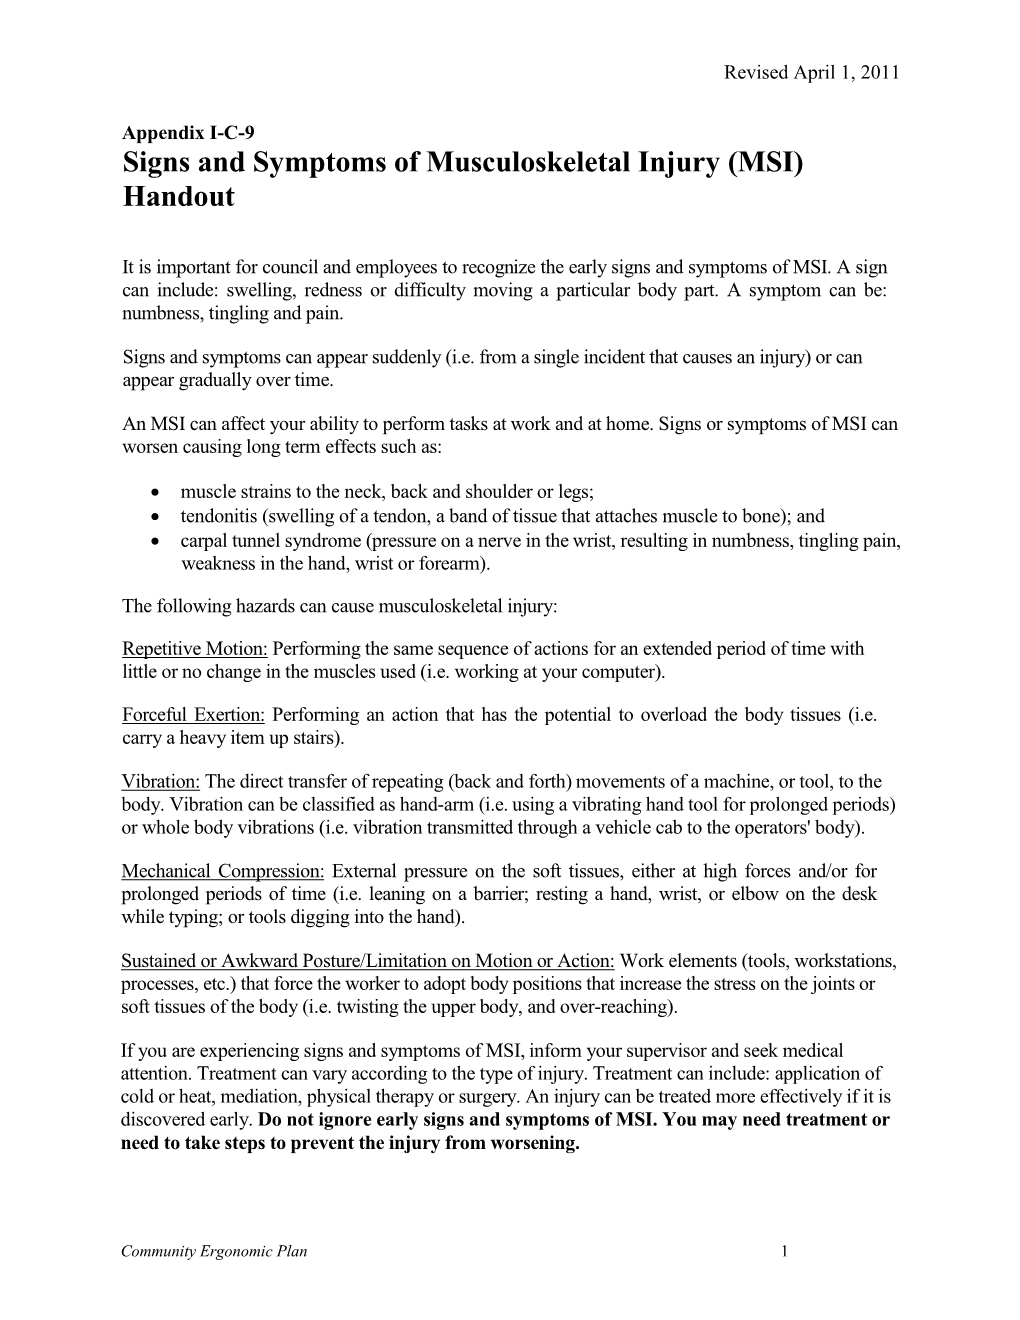 Signs and Symptoms of Musculoskeletal Injury (MSI) Handout